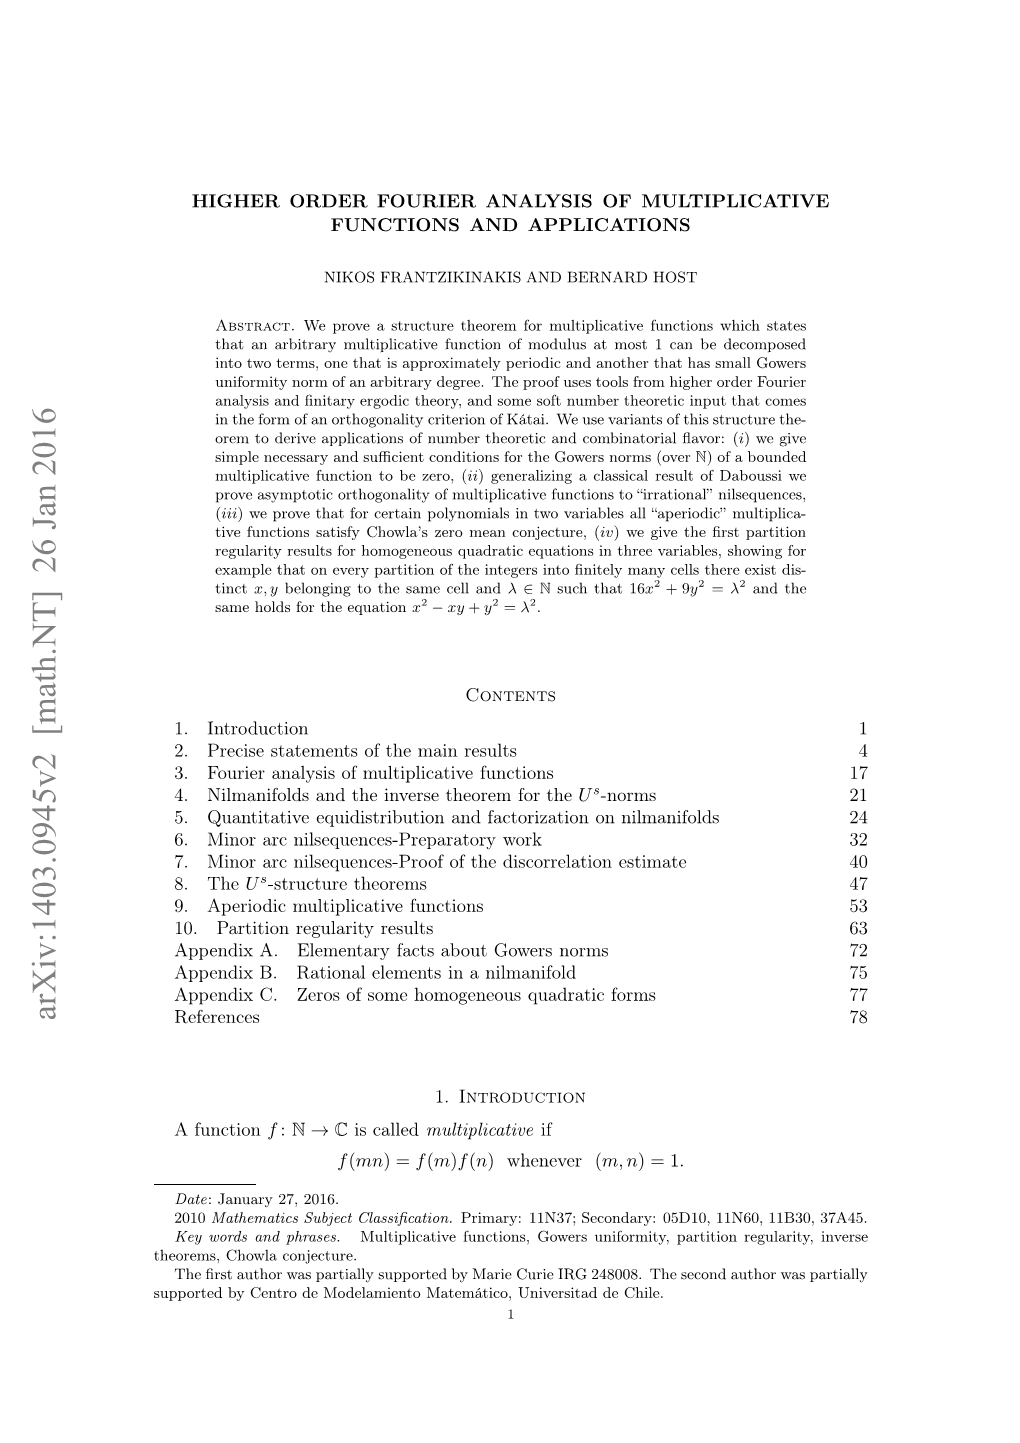 Higher Order Fourier Analysis of Multiplicative Functions and Applications